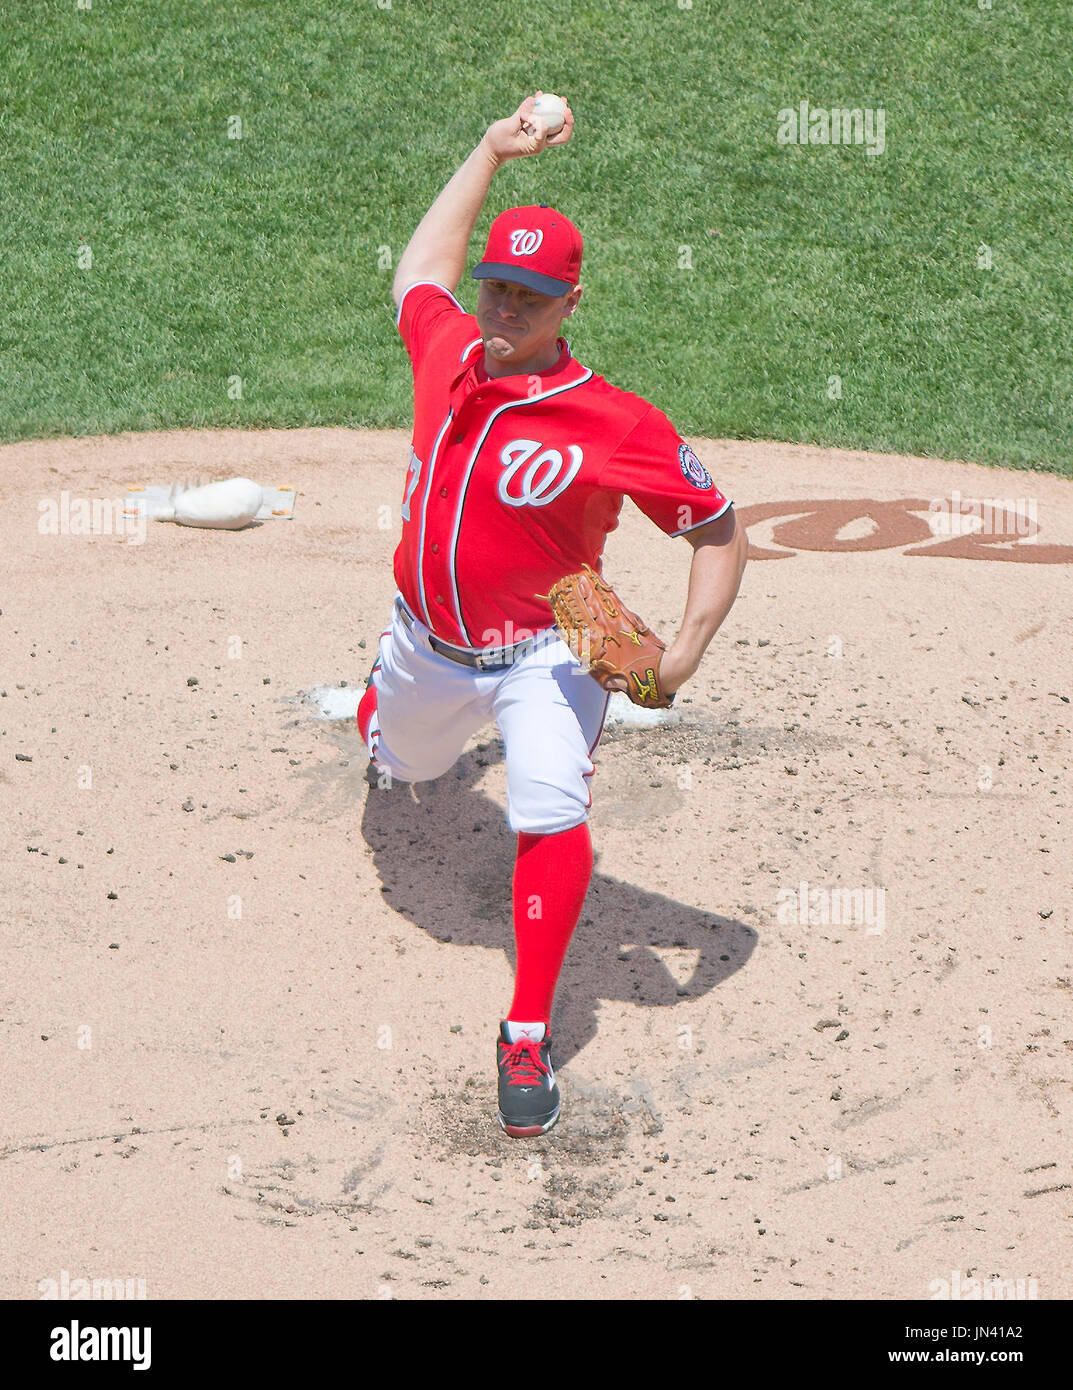 Washington Nationals pitcher Jordan Zimmermann (27) works in the second inning against the New York Mets at Nationals Park in Washington, DC on Sunday, May 18, 2014.   Credit: Ron Sachs / CNP (RESTRICTION: NO New York or New Jersey Newspapers or newspapers within a 75 mile radius of New York City) Stock Photo